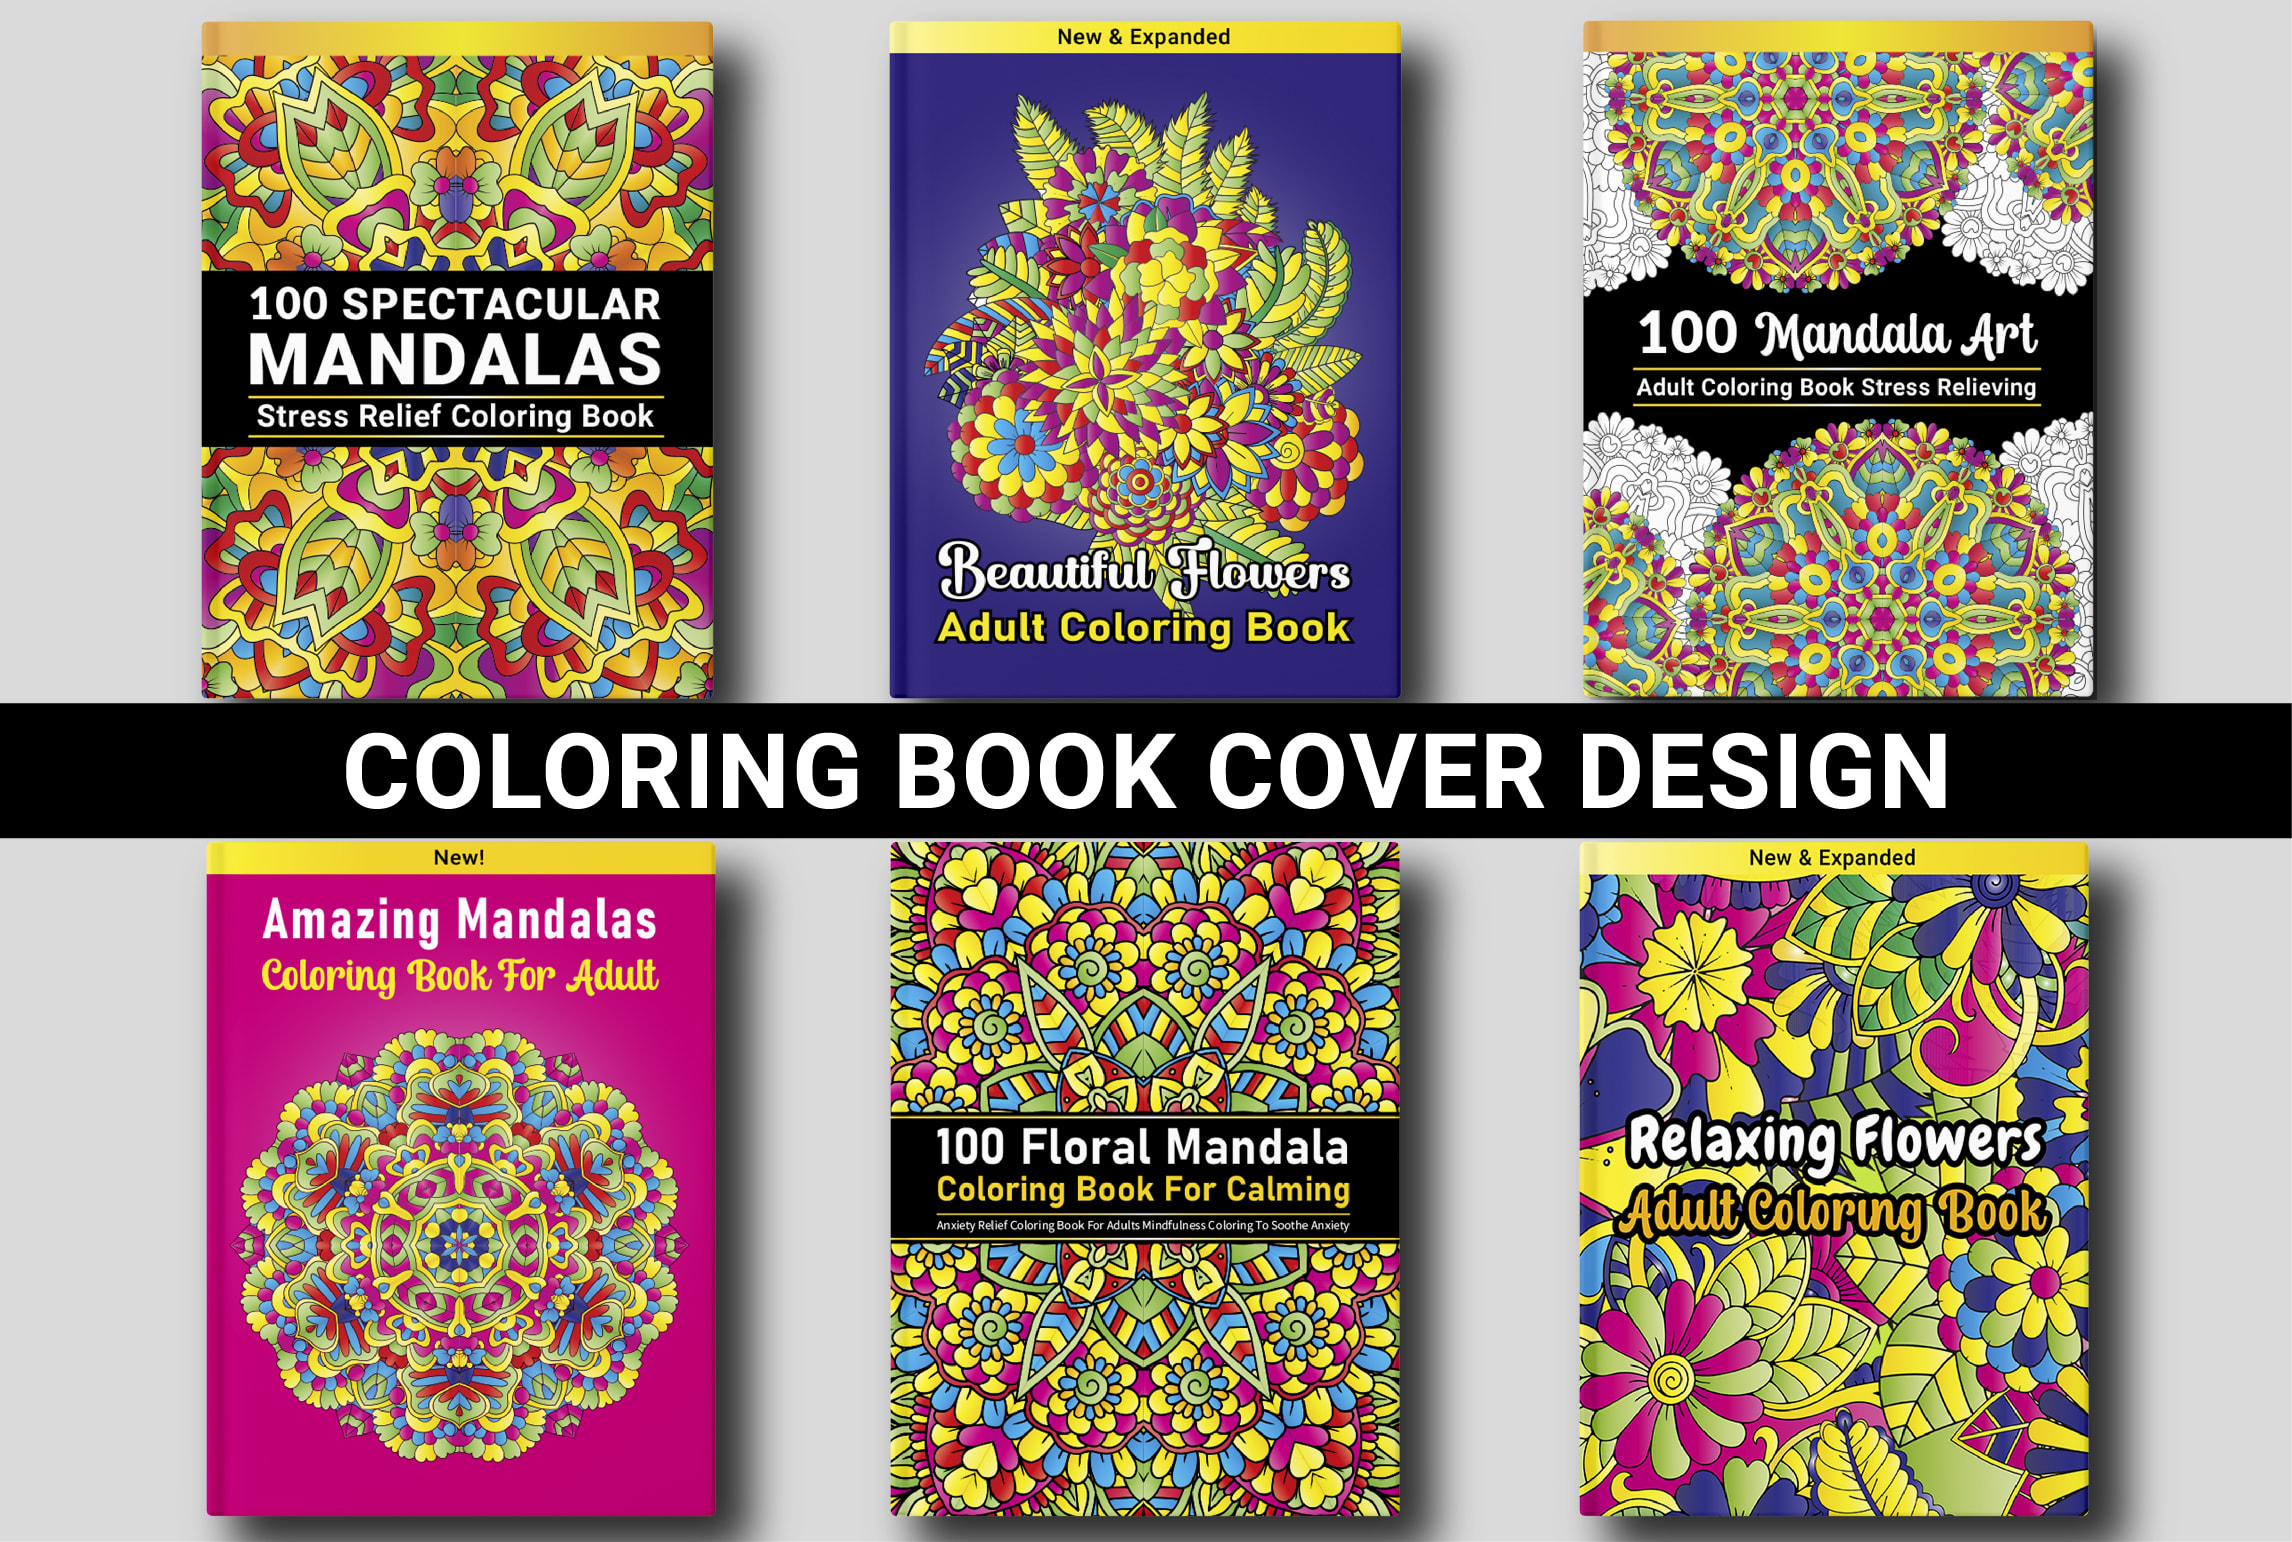 Mandala Coloring Book for Adults Relaxation and Stress relief: Relaxing  Mandala Patterns Adult Coloring Book: Stress Relieving Mandala, Anxiety  Relief